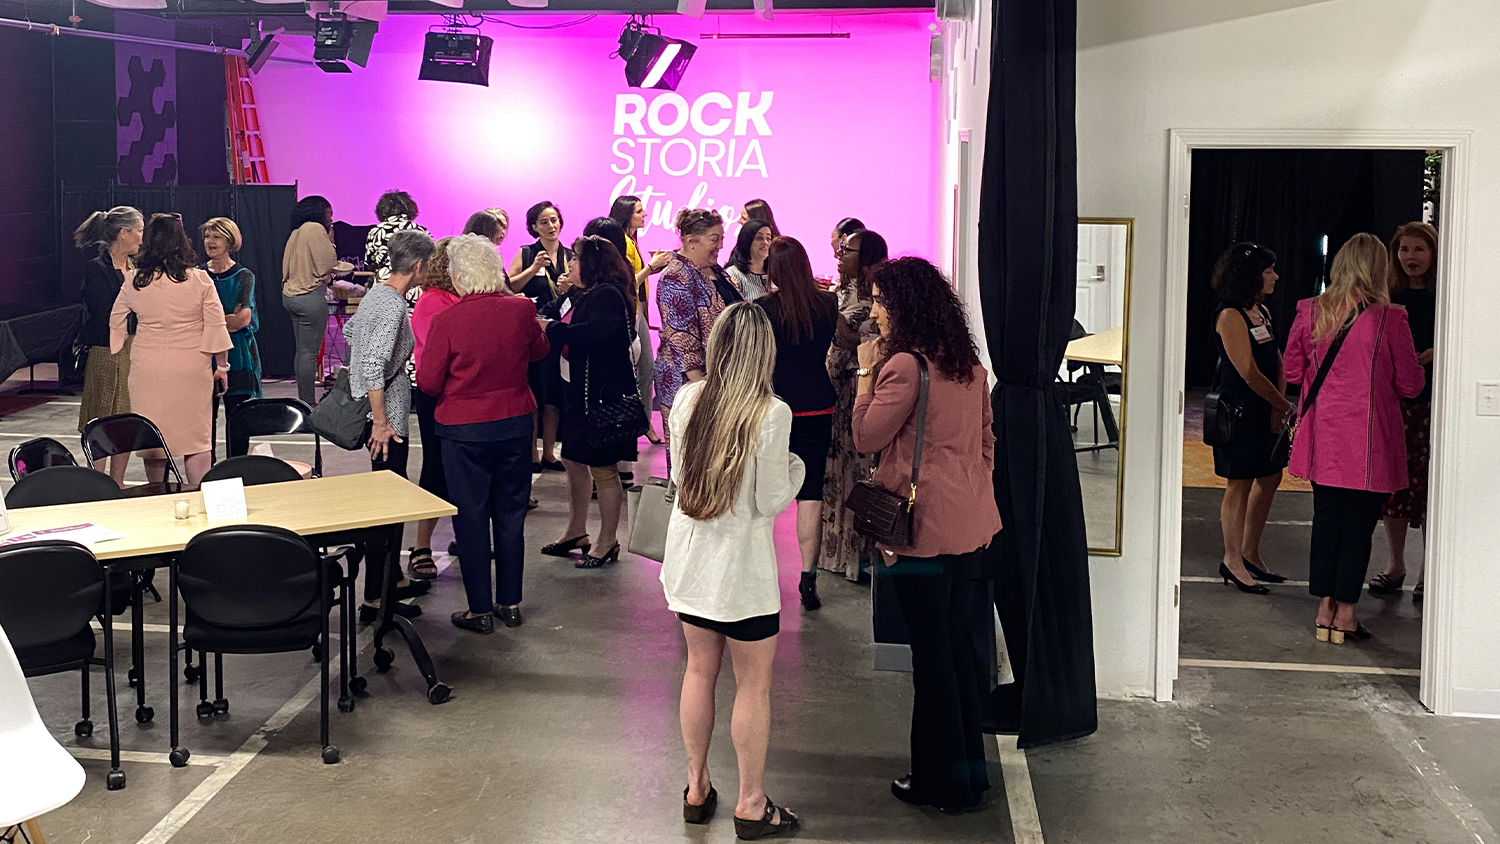 NAWBO event rental at Rockstoria Studios in St. Paul, MN. Women mingle in the open concept layout with a wall illuminated in pink light.